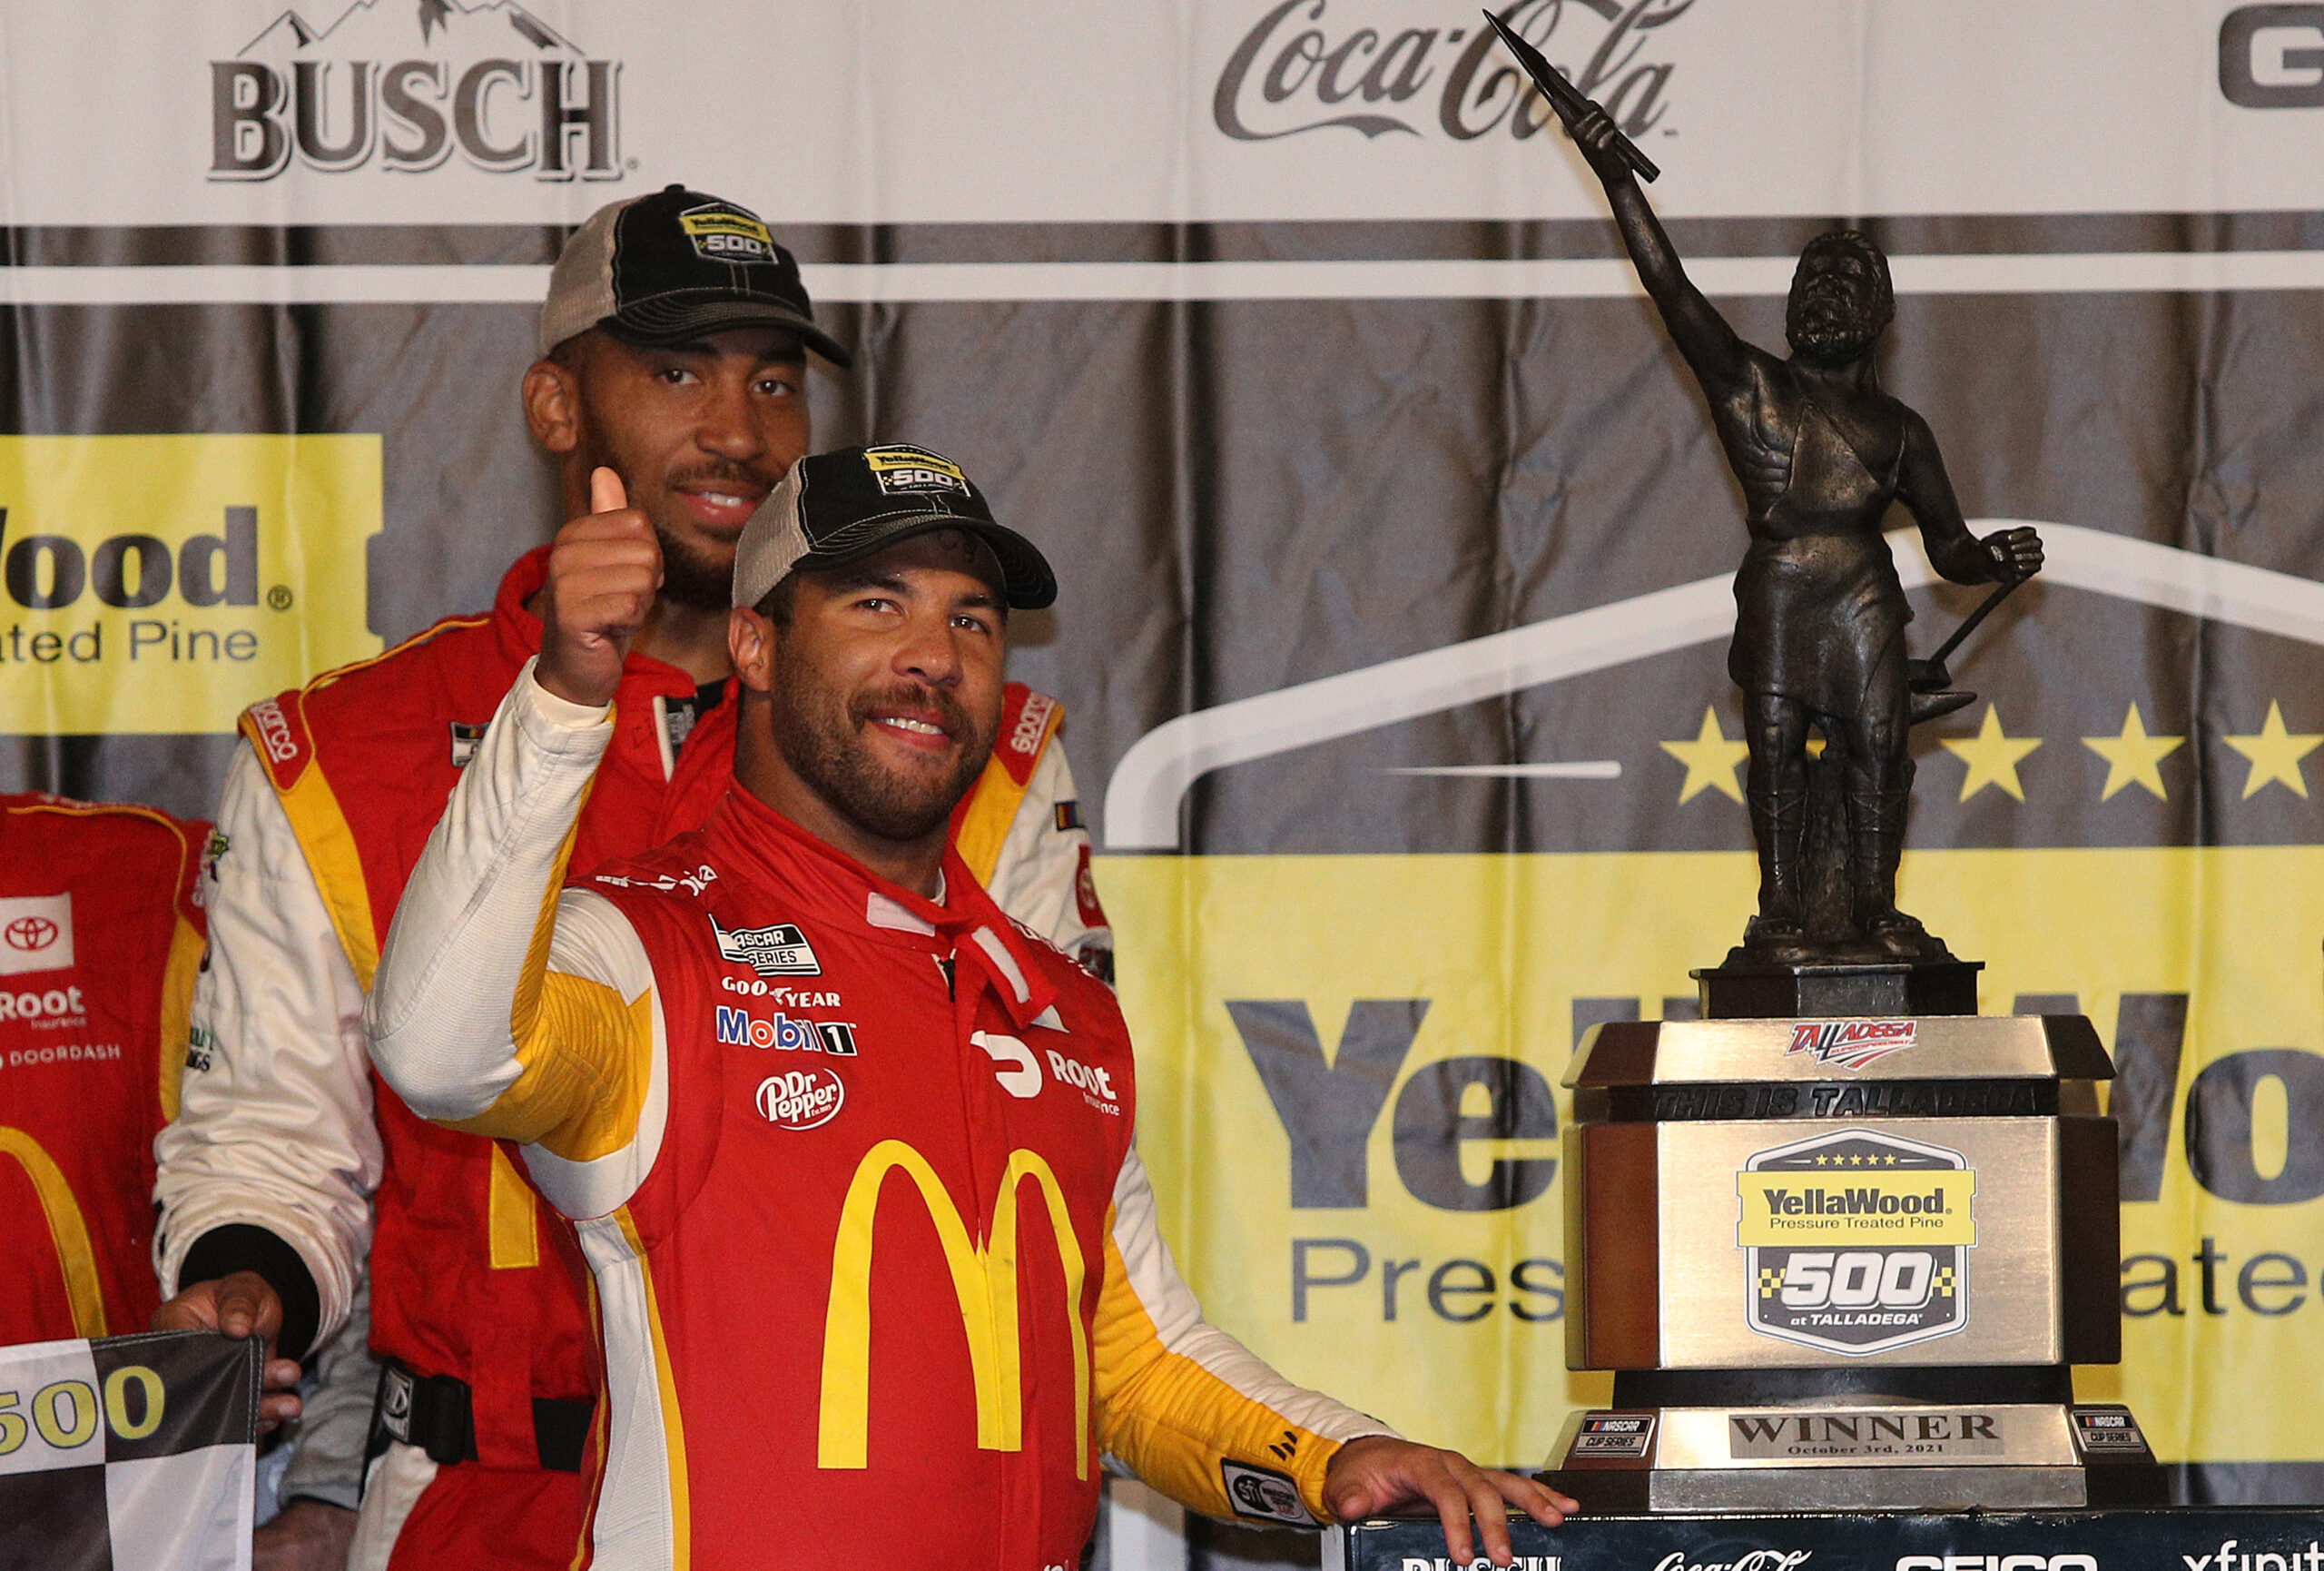 Bubba Wallace celebrates his historical first Cup win at Talladega. (Photo: Sean Gardner | Getty Images)